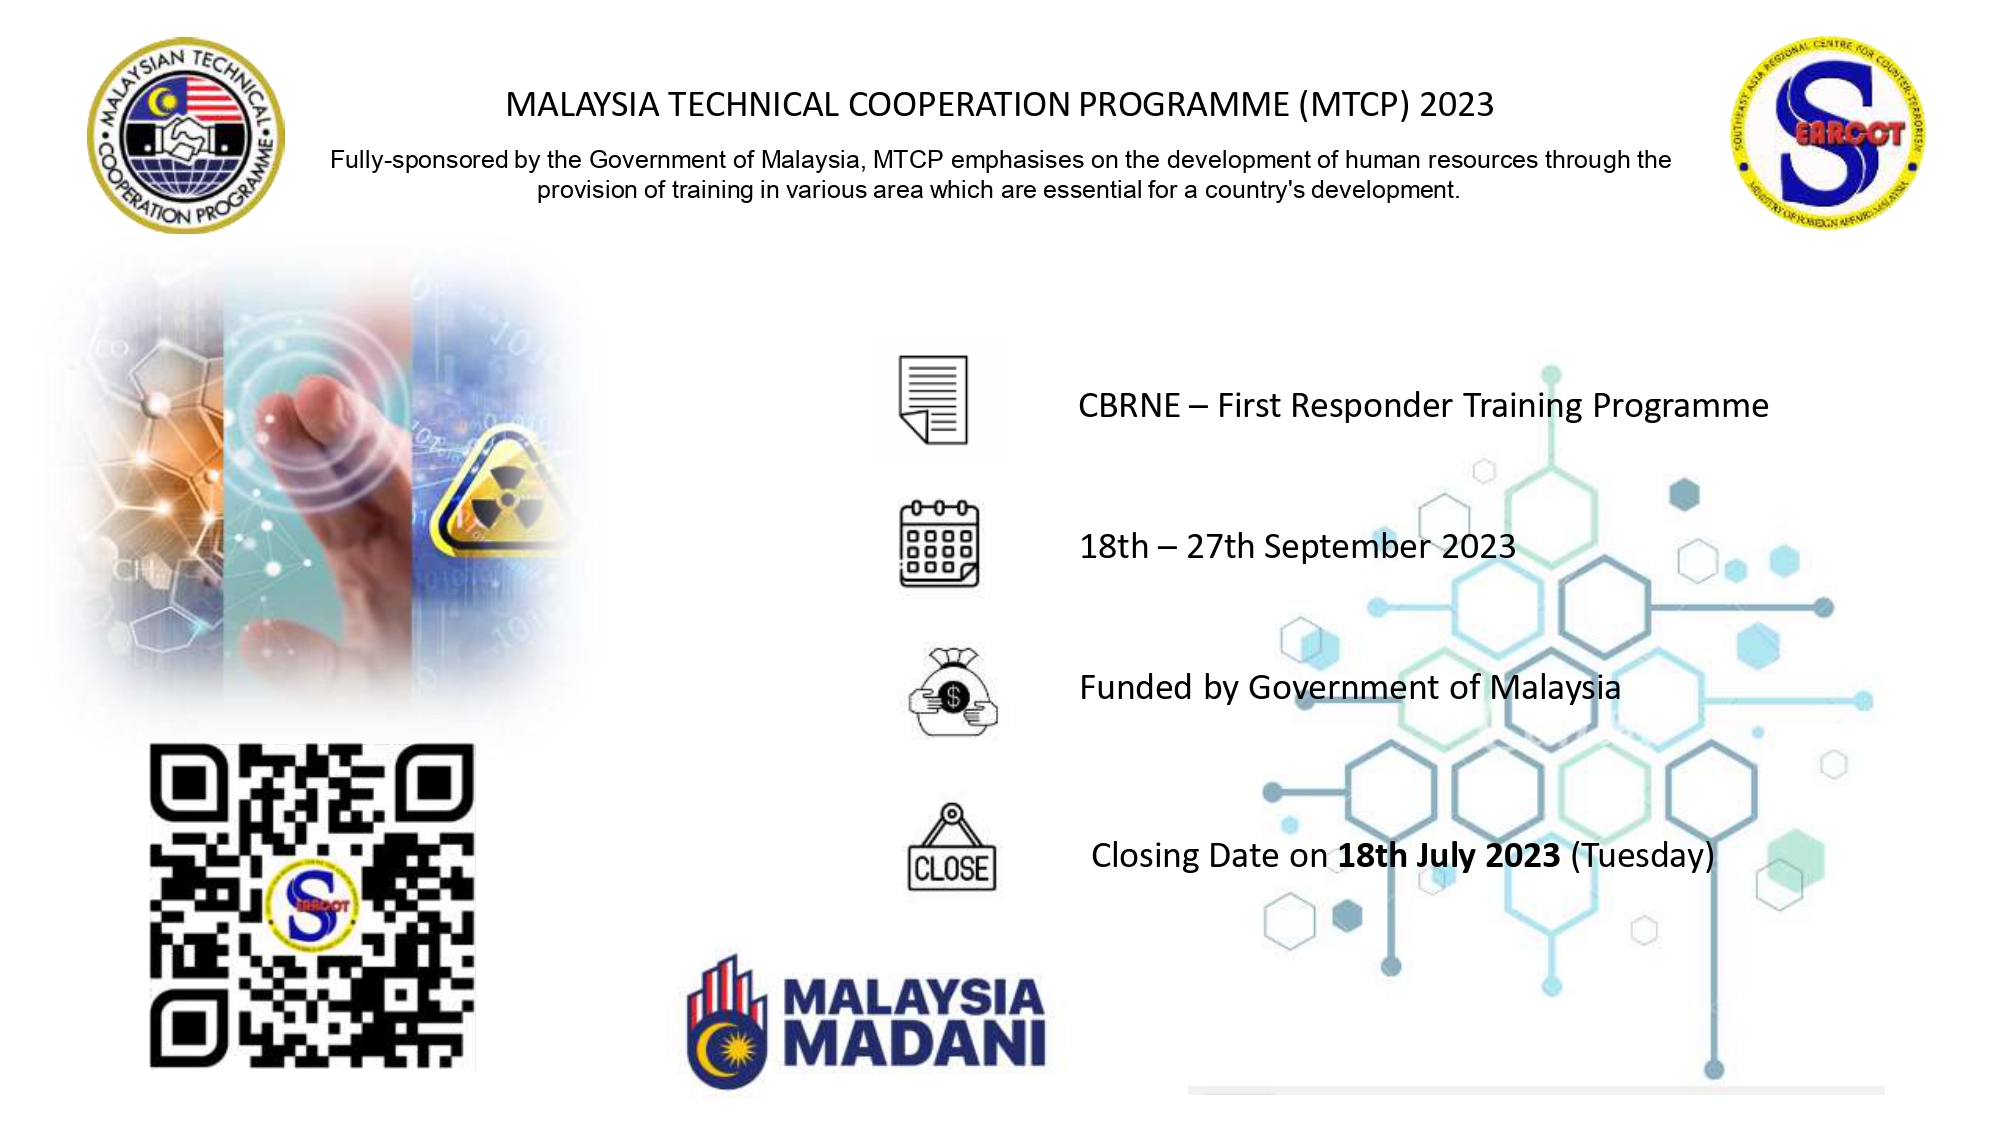 MTCP 2023: CHEMICAL, BIOLOGICAL, RADIOLOGICAL, NUCLEAR AND EXPLOSIVE (CBRNE) – FIRST RESPONDER TRAINING PROGRAMME